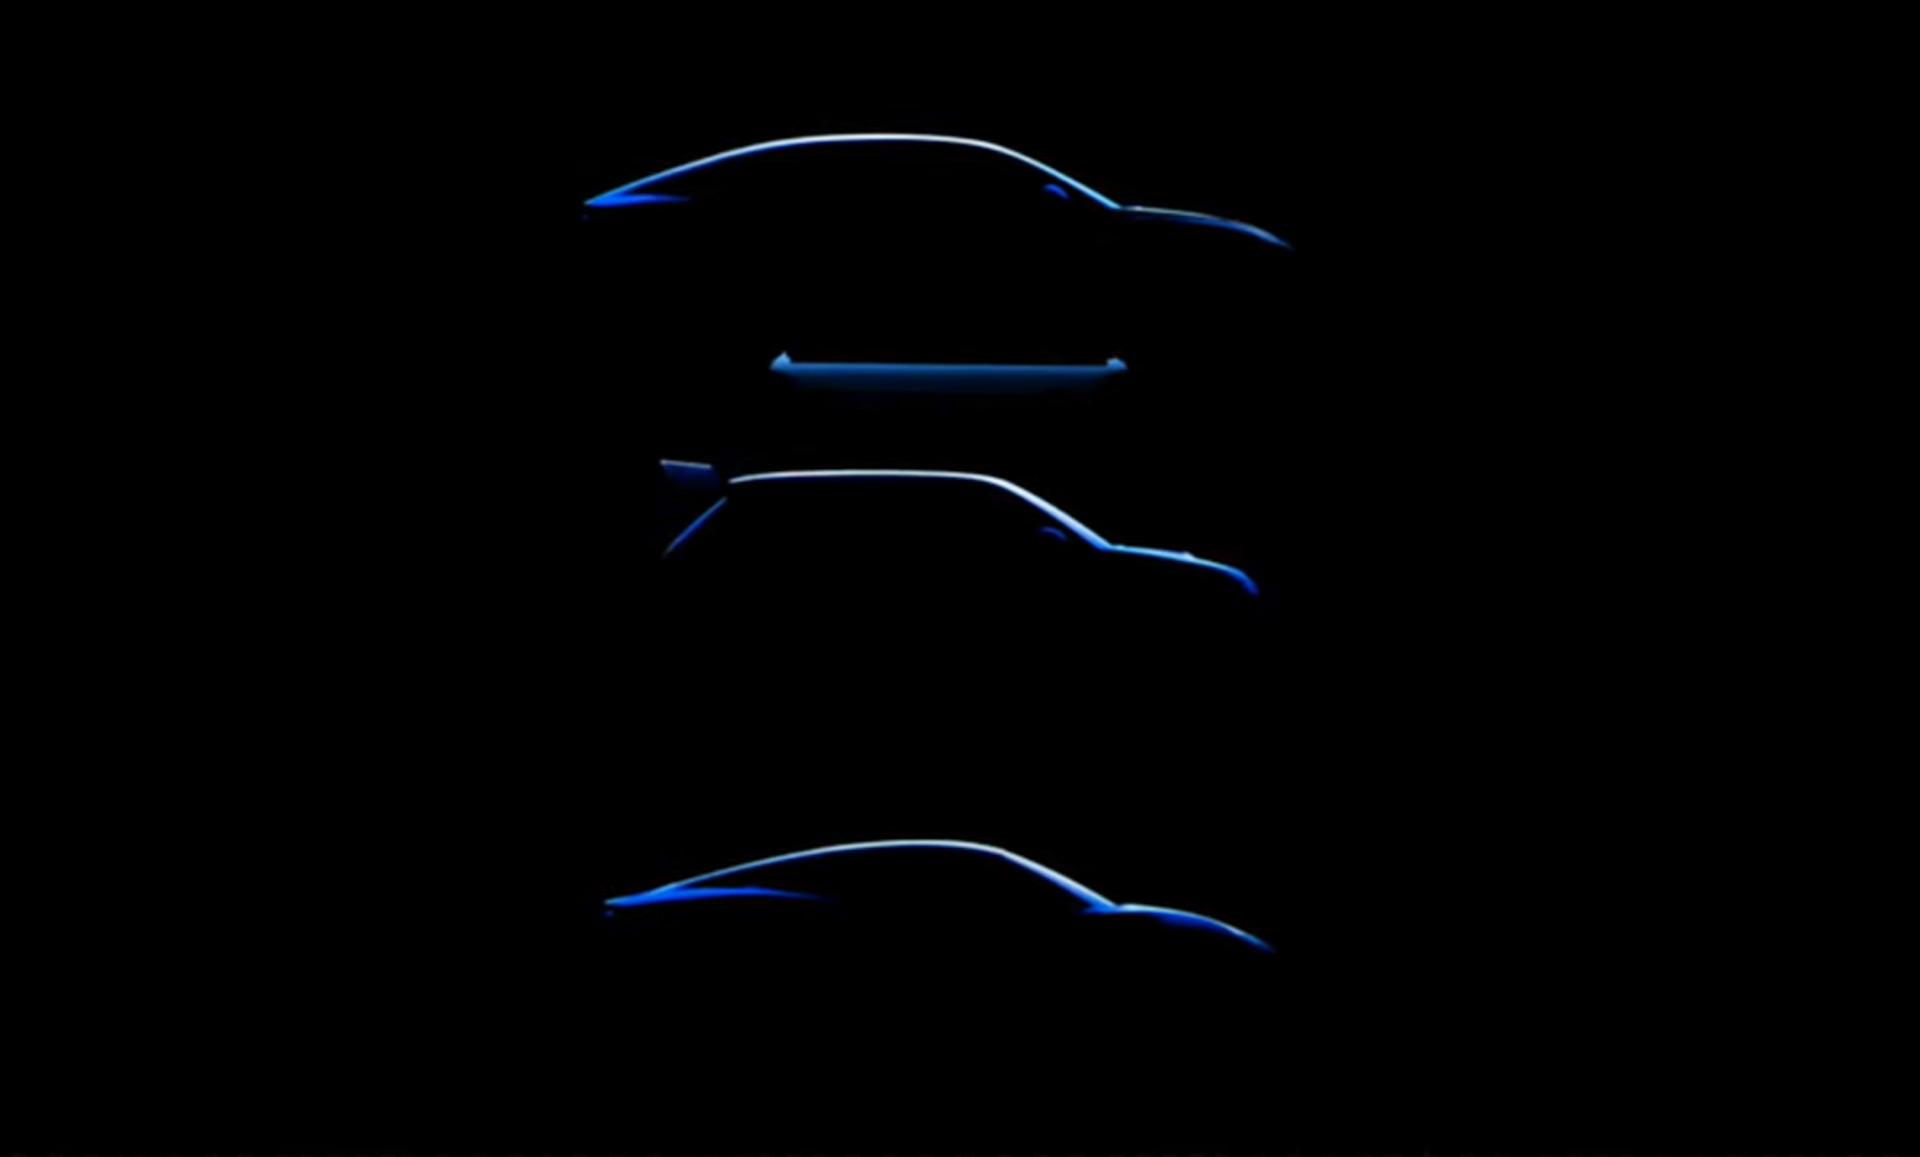 3 Alpine electric cars teased during presentation on June 30, 2021